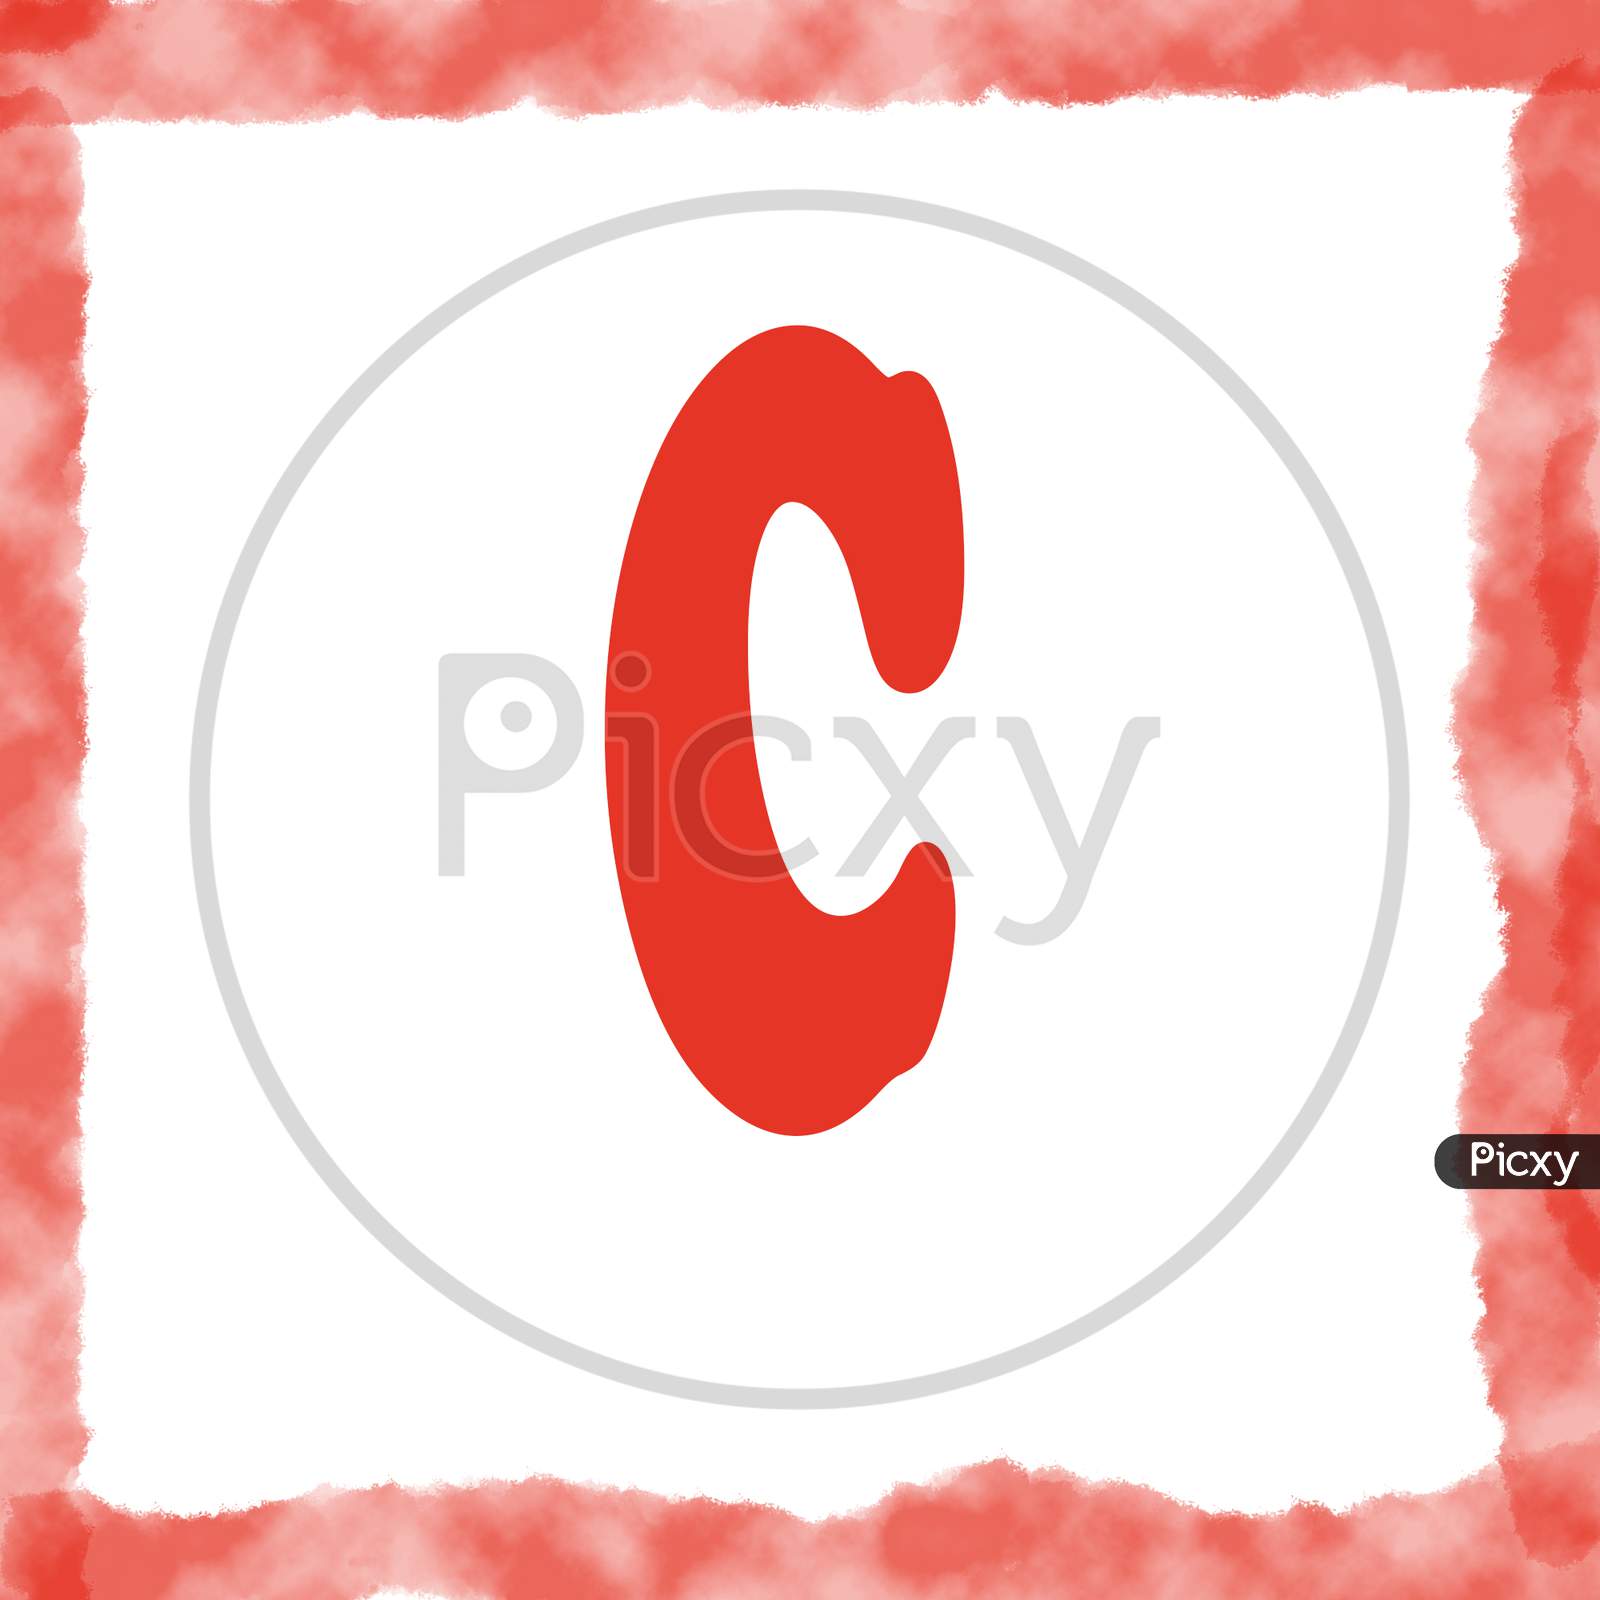 Alphabet capital C in red over white background.